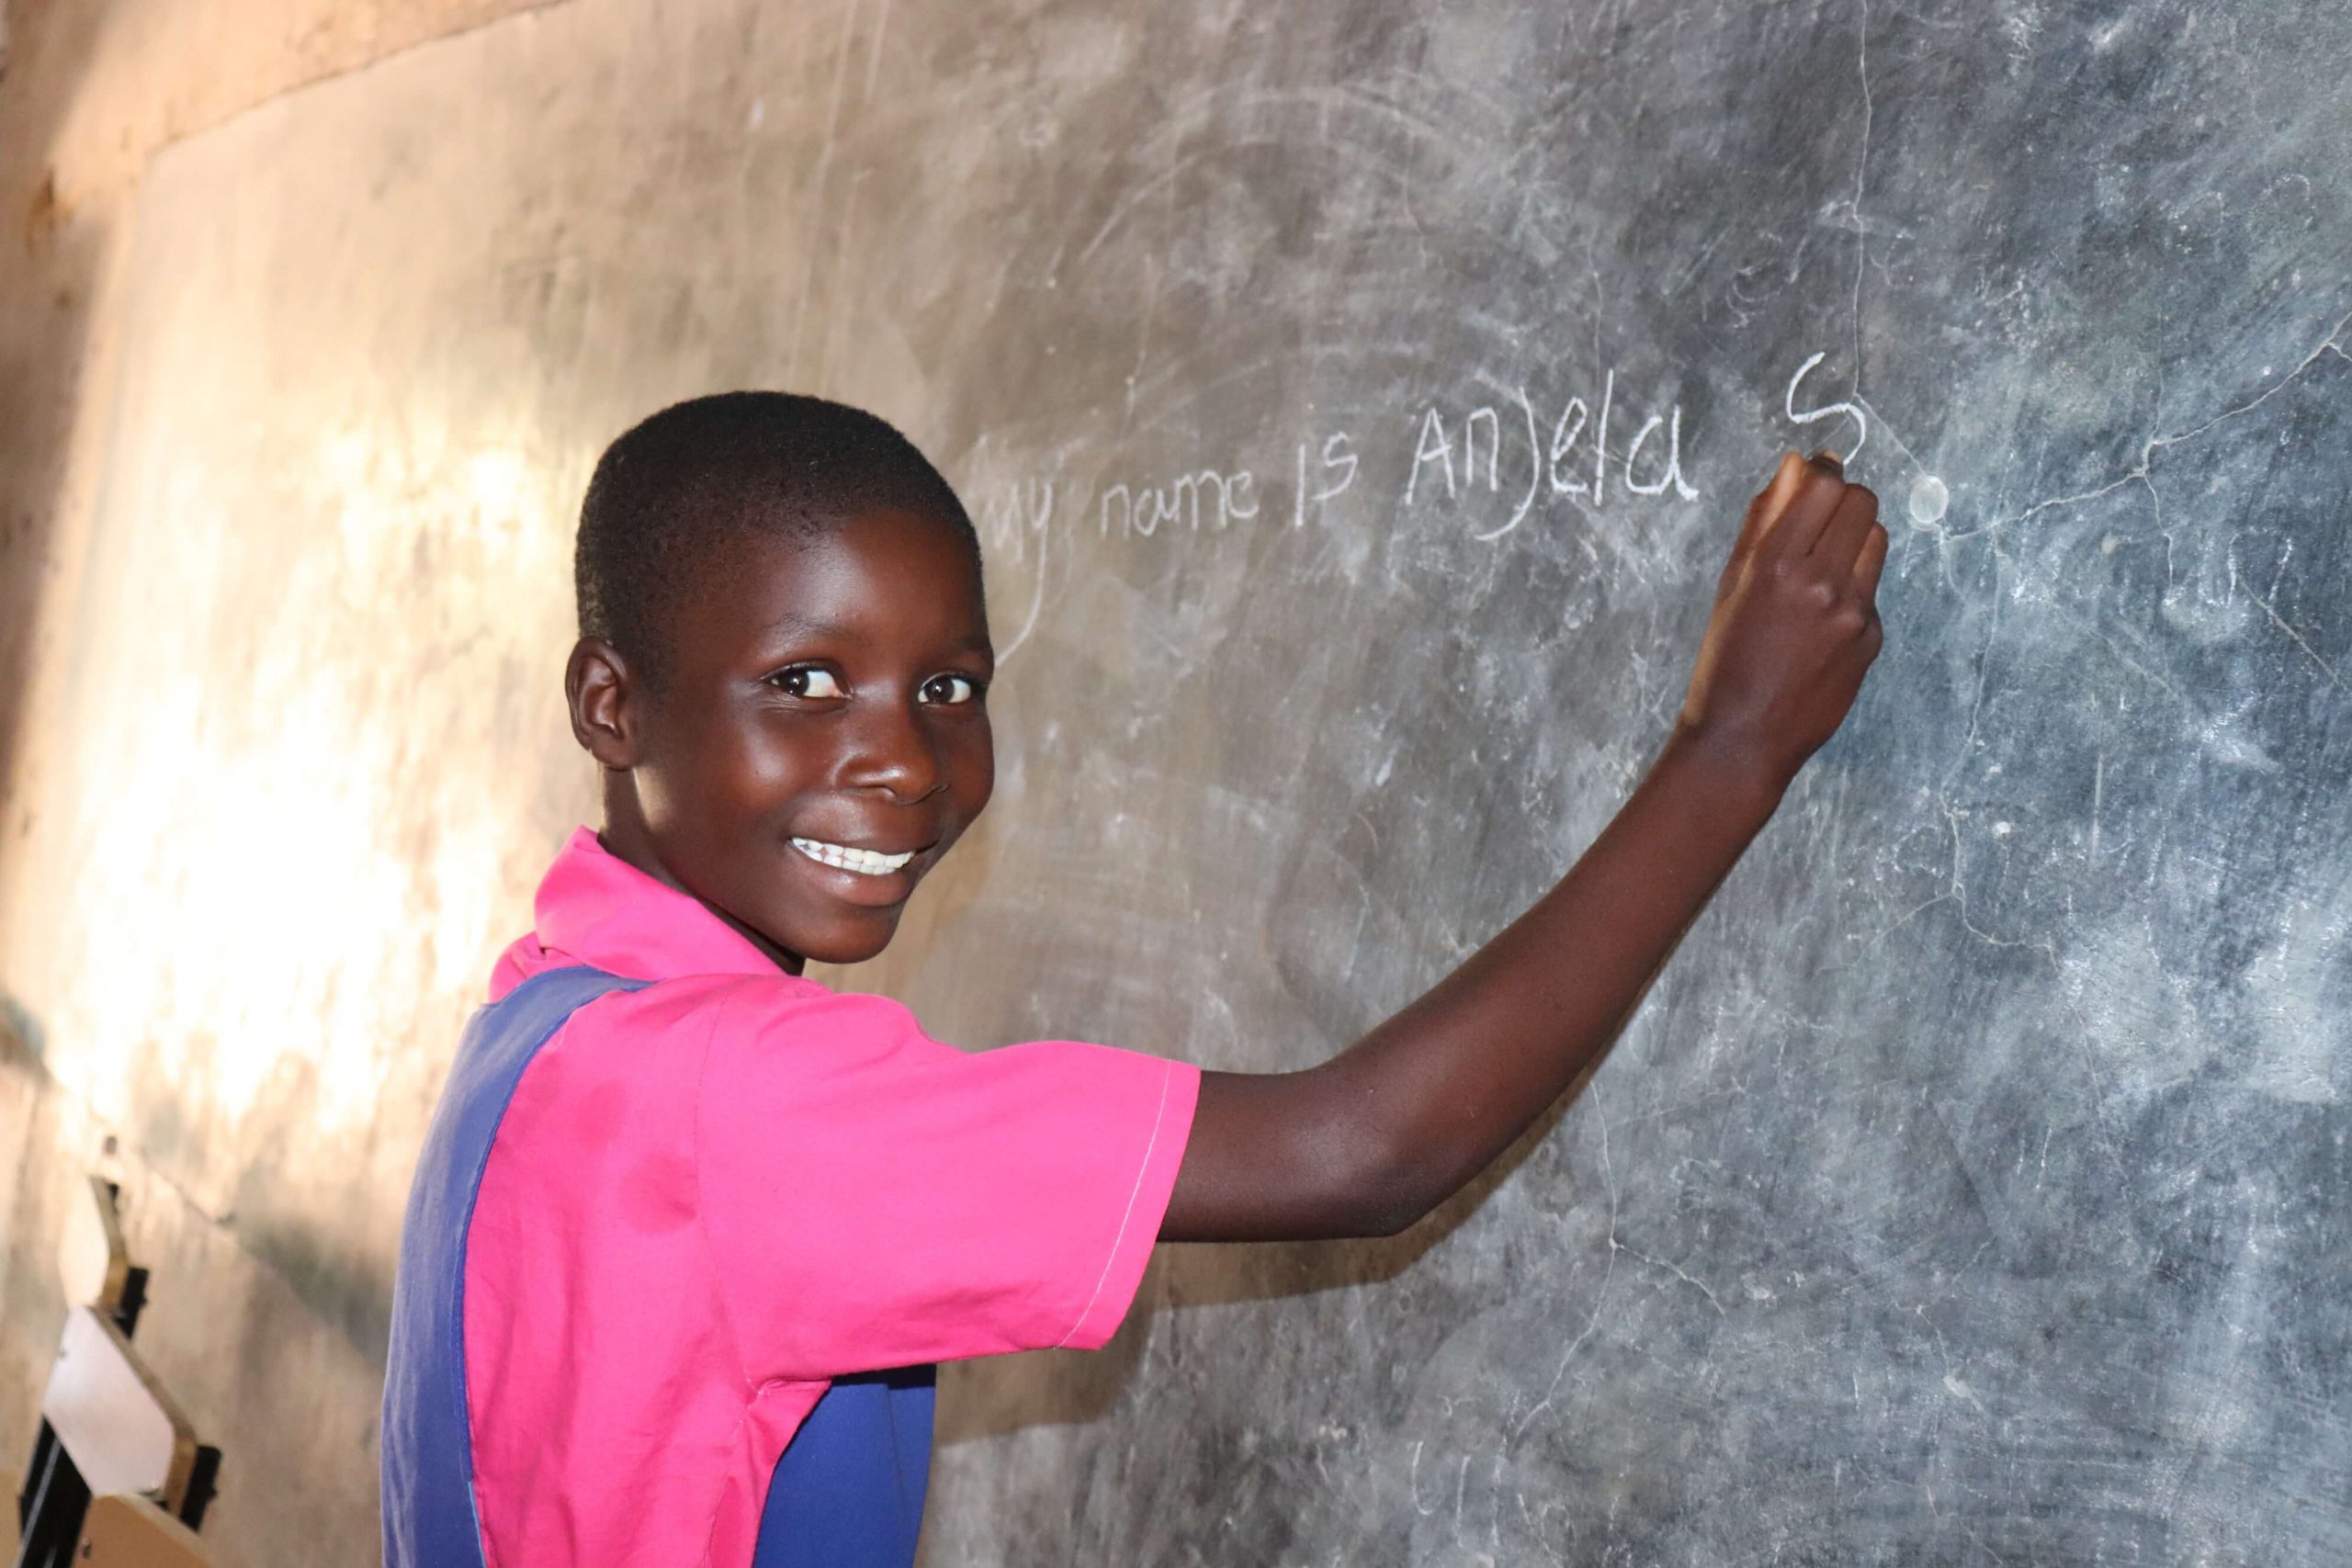 Balaka district, Malawi: Angela writes her name on the classroom blackboard at a primary school in Balaka district, Malawi. Photo credit: Veronica Mwale/Oxfam in Southern Africa